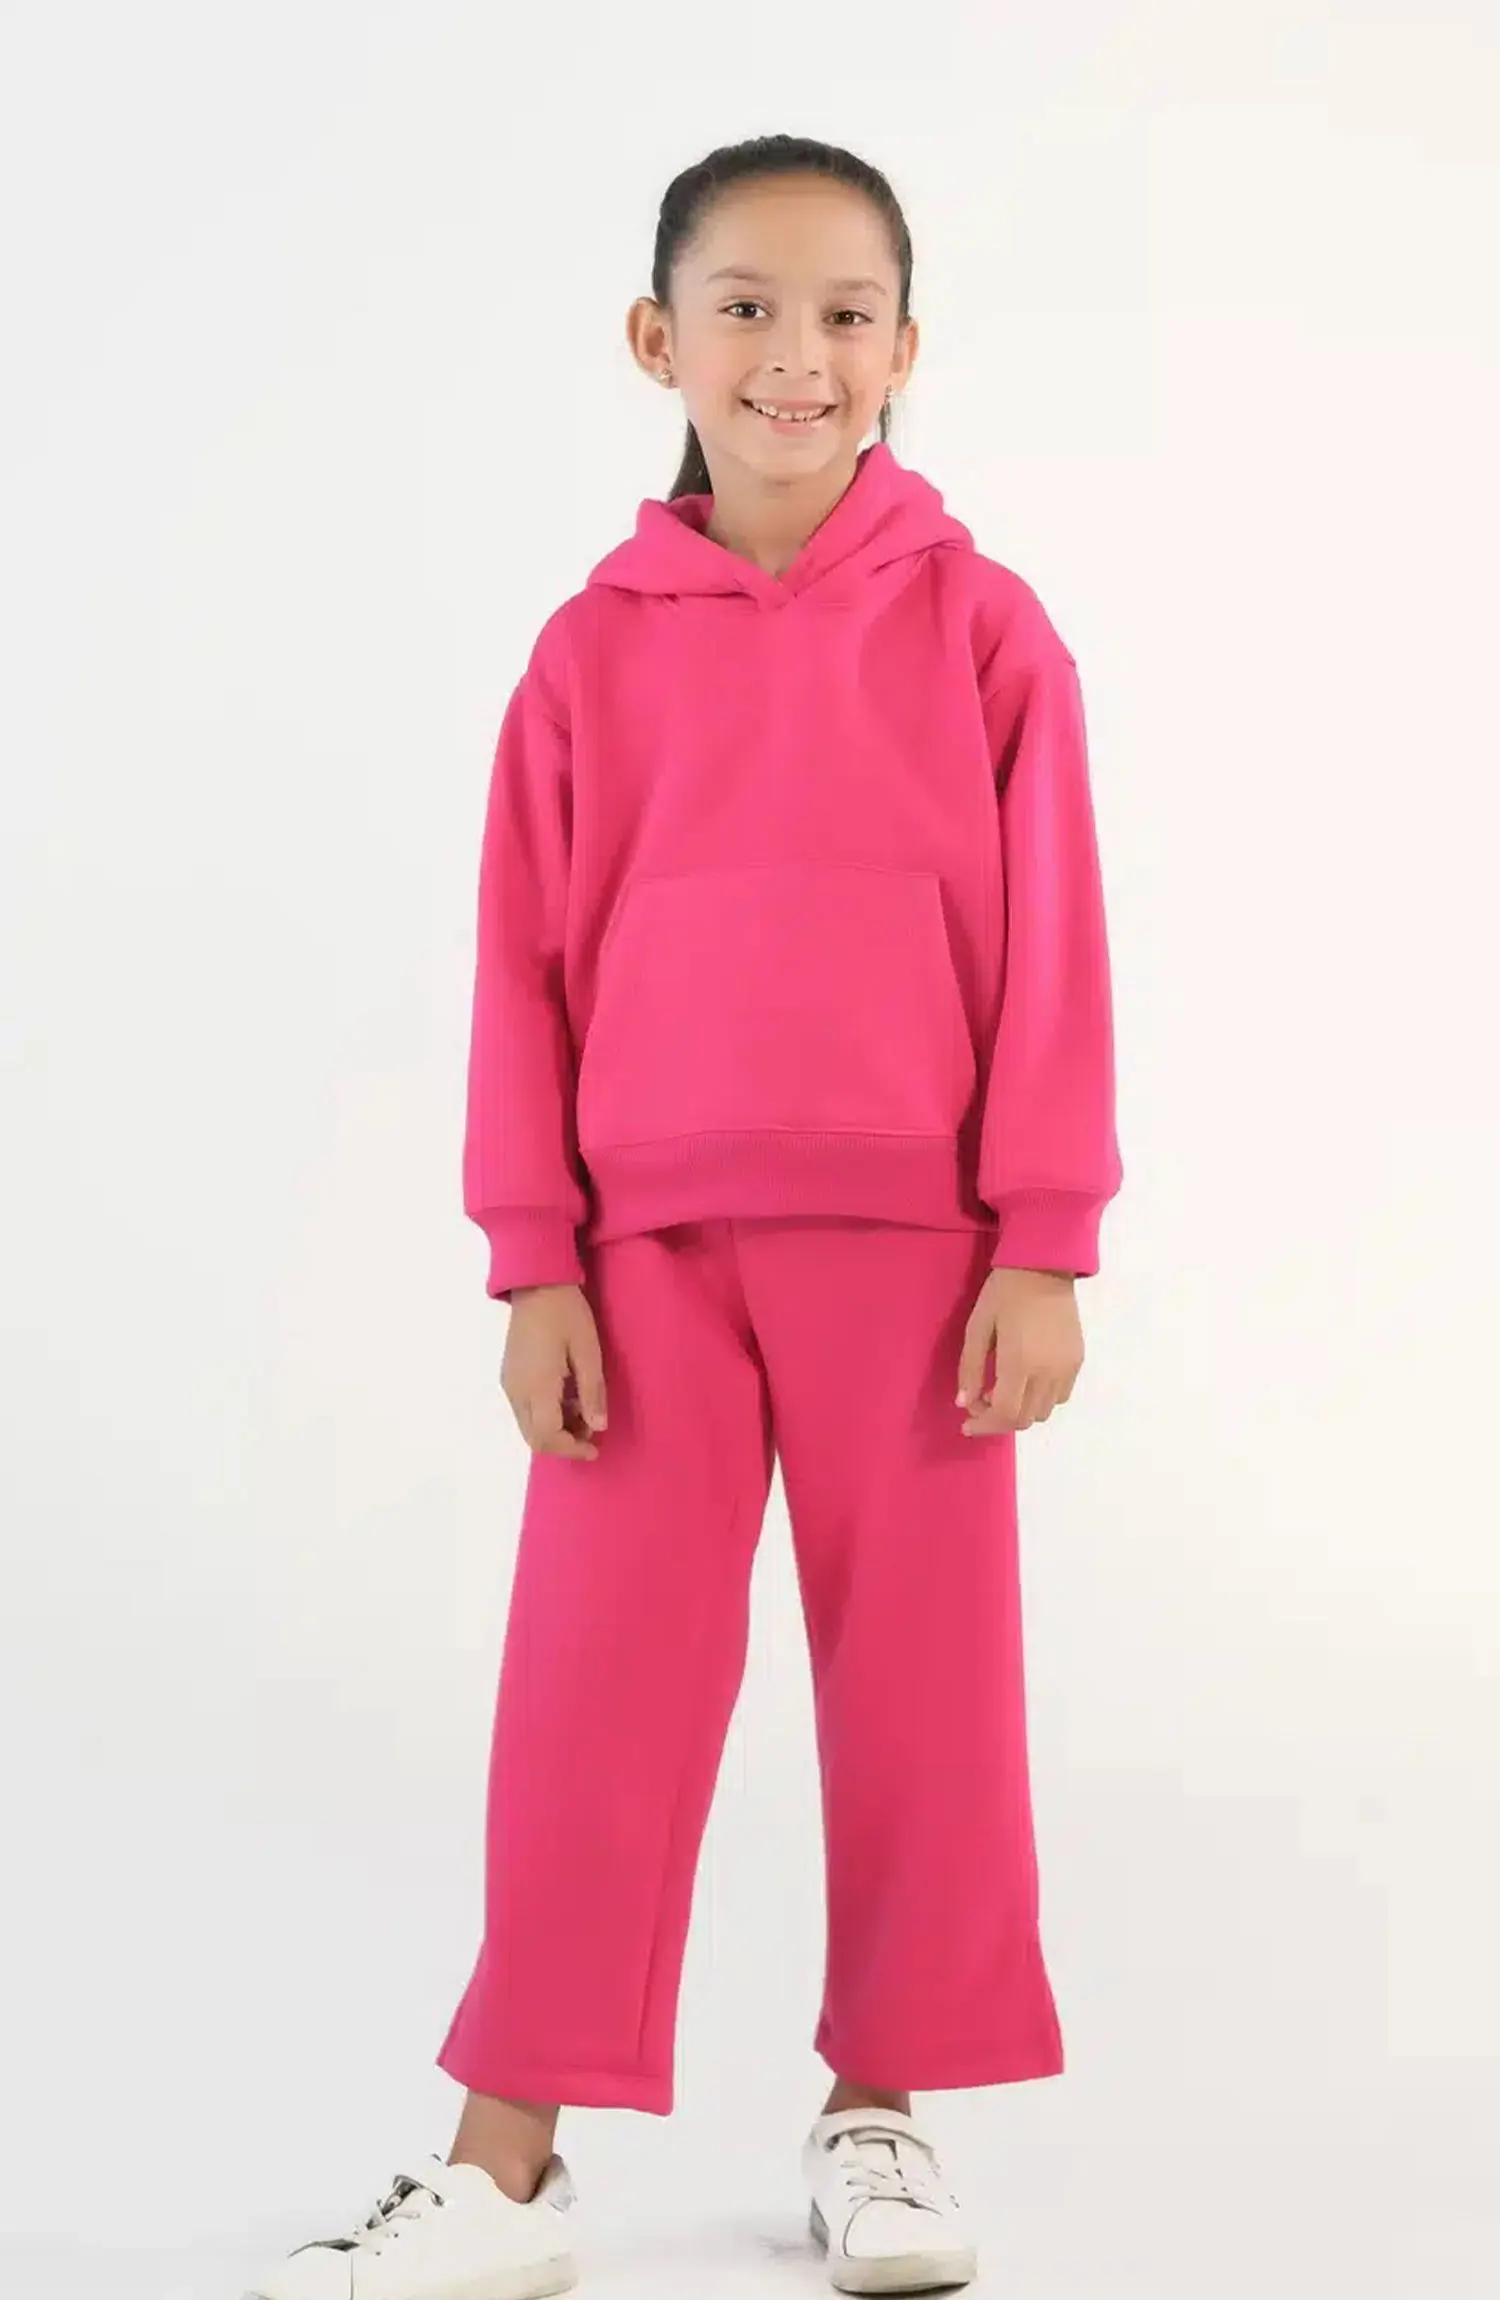 Sprinkles Kids Winter Collection - Hoodie With Slit Open Flared Pants – Hot Pink